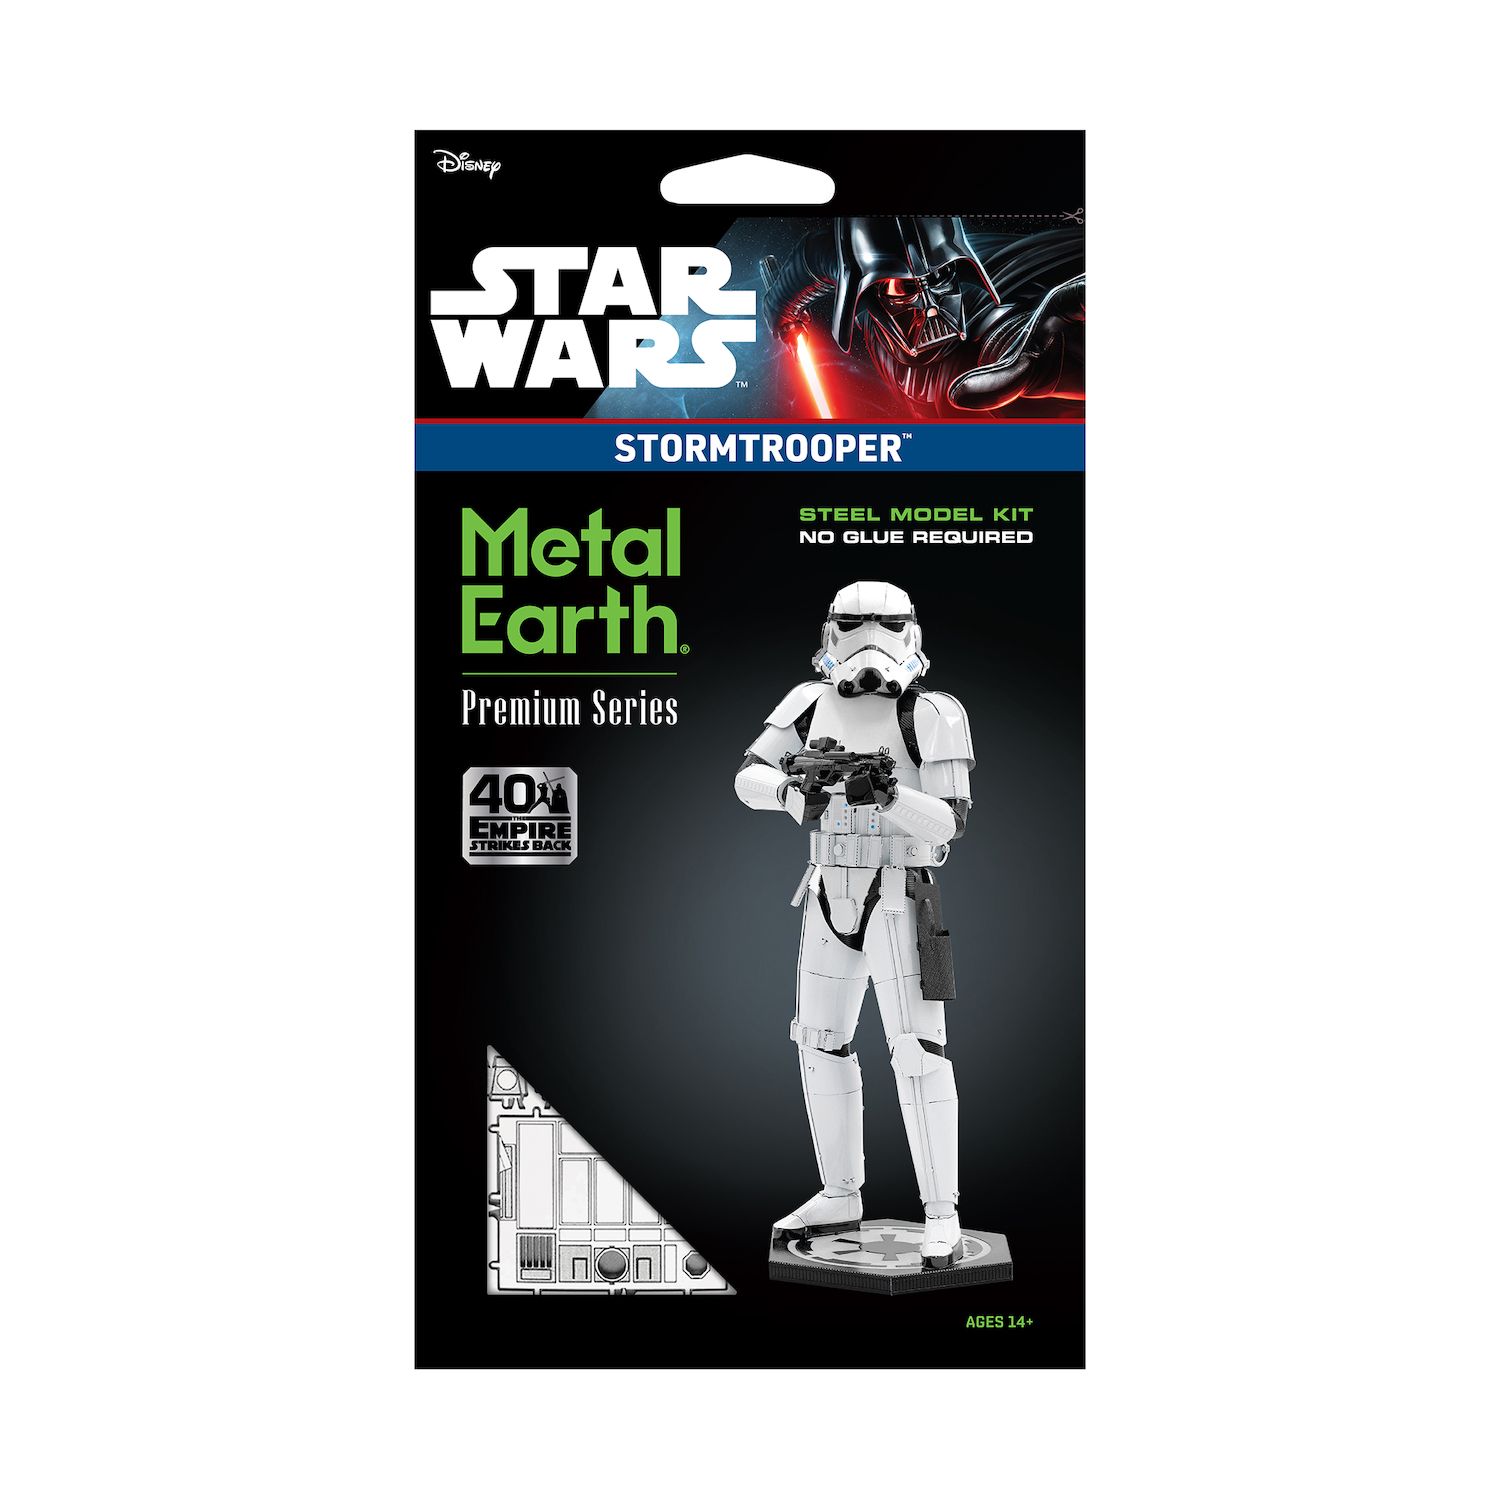 Buying Metal Earth 3D puzzles at best prices? Wide choice